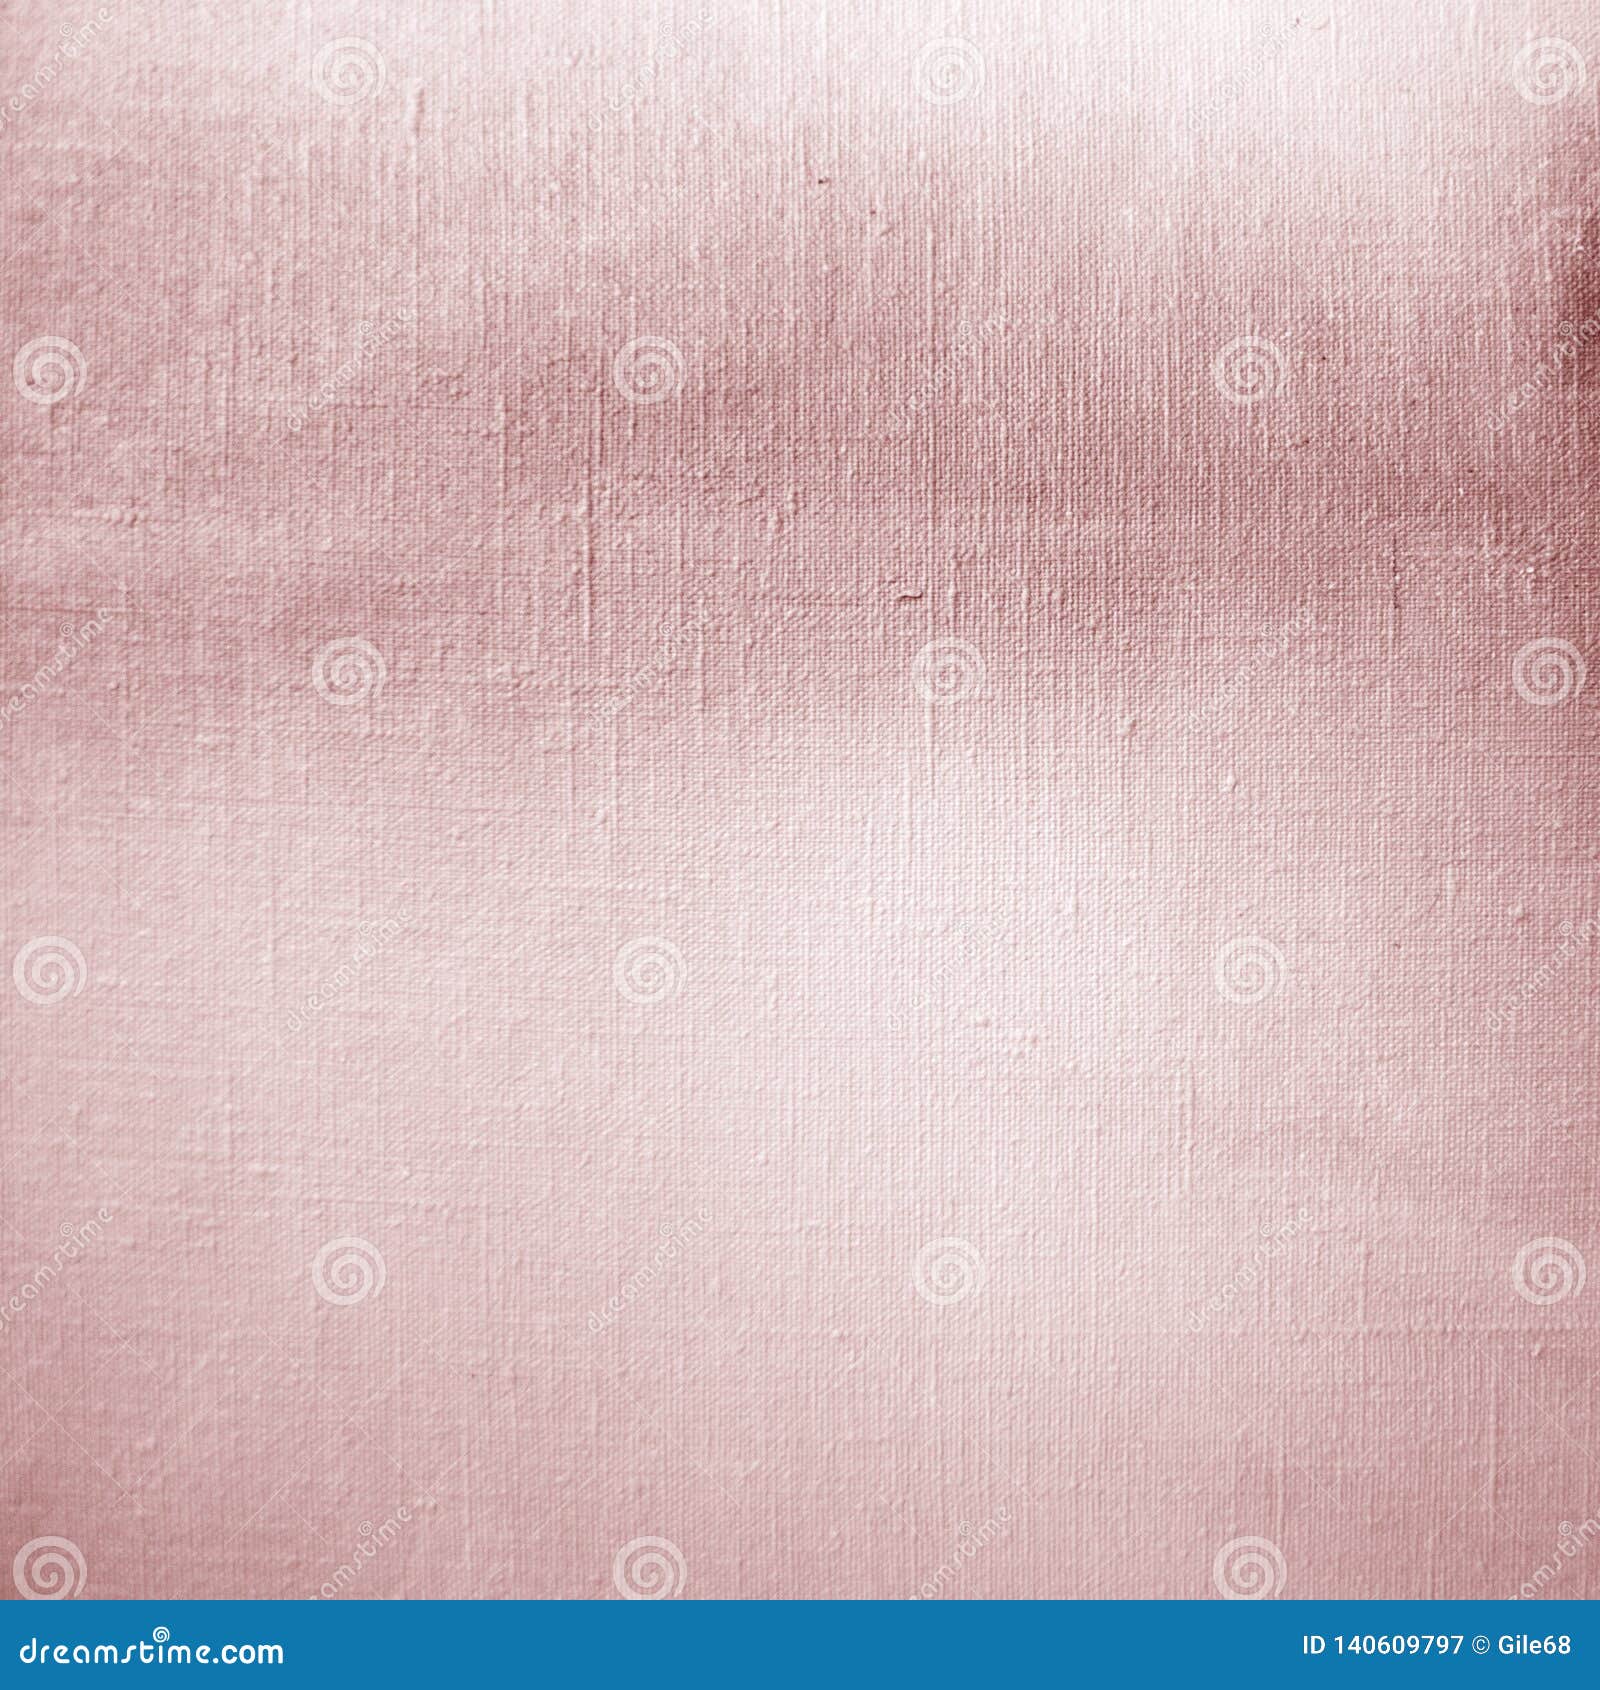 Grunge Pale Pink Background,background with Soft Pastel Vintage Background  Grunge Texture and Light Solid Design White Background Stock Image - Image  of creative, canvas: 140609797